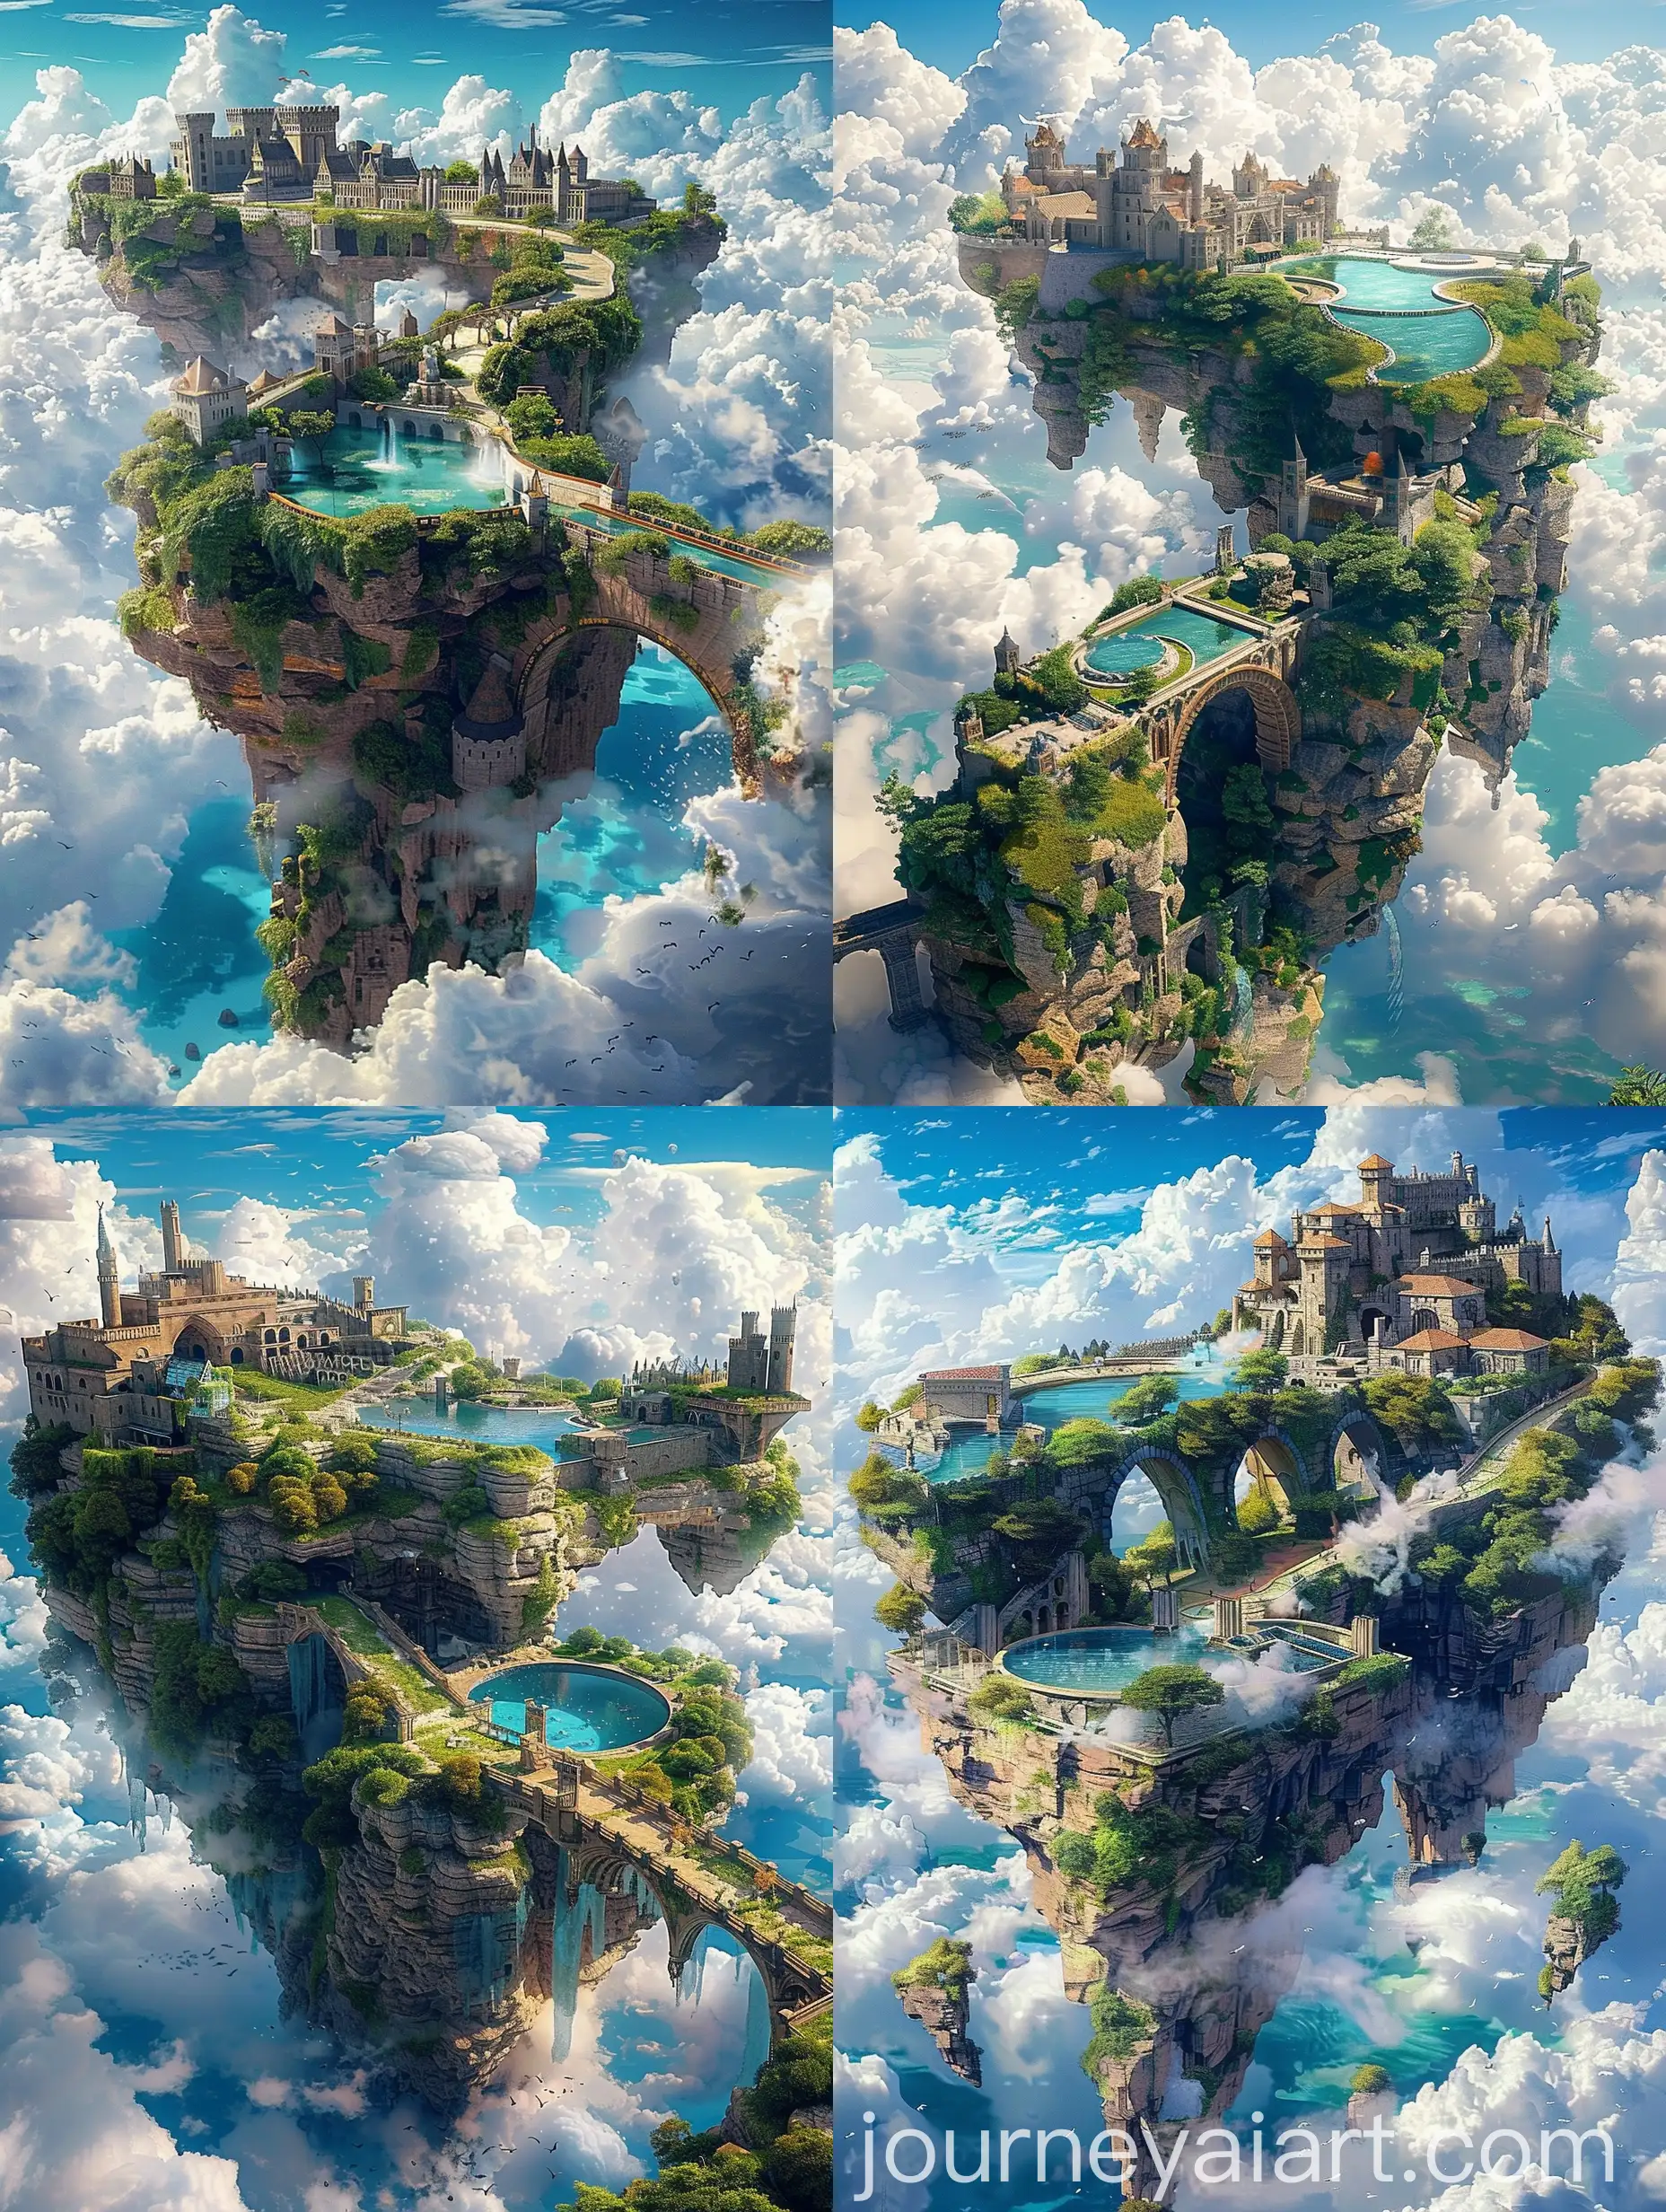 A fantastical landscape featuring a large rock formation suspended above the clouds. Atop the formation, there is a castle and various structures, including an arched bridge leading to more buildings in the distance. Lush greenery surrounds the pools and pathways, blending nature with medieval architecture. The sky is bright blue with large, fluffy clouds, creating a whimsical, otherworldly atmosphere.